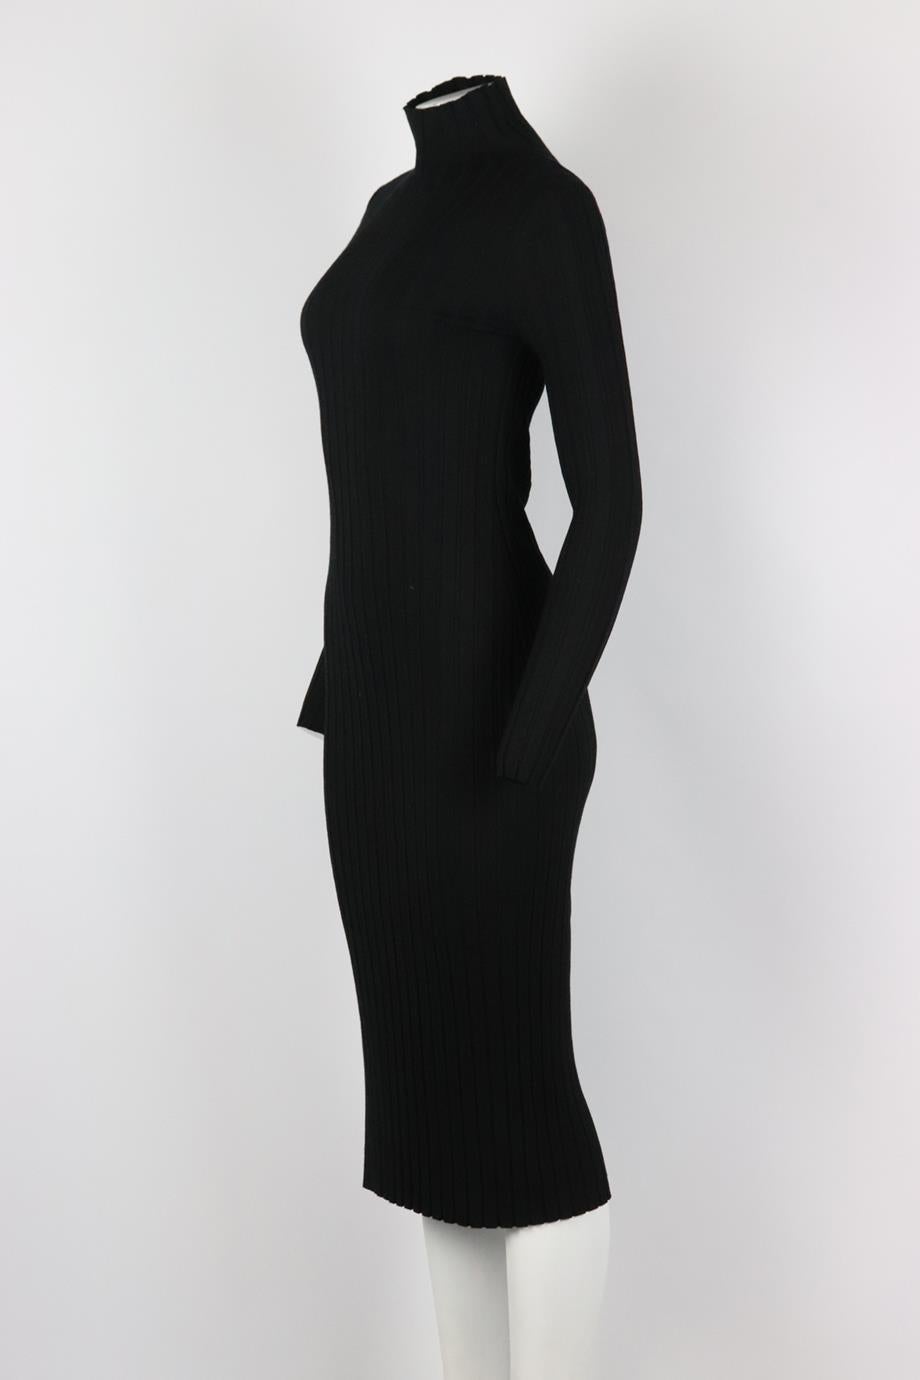 Theory ribbed knit midi dress. Black. Long sleeve, turtleneck. Slips on. 90% Viscose, 10% polyester. Size Medium (UK 10, US 6, FR 38, IT 42) Bust: 30 in. Waist: 28 in. Hips: 34 in. Length: 48 in. Very good condition - As new condition, no sign of